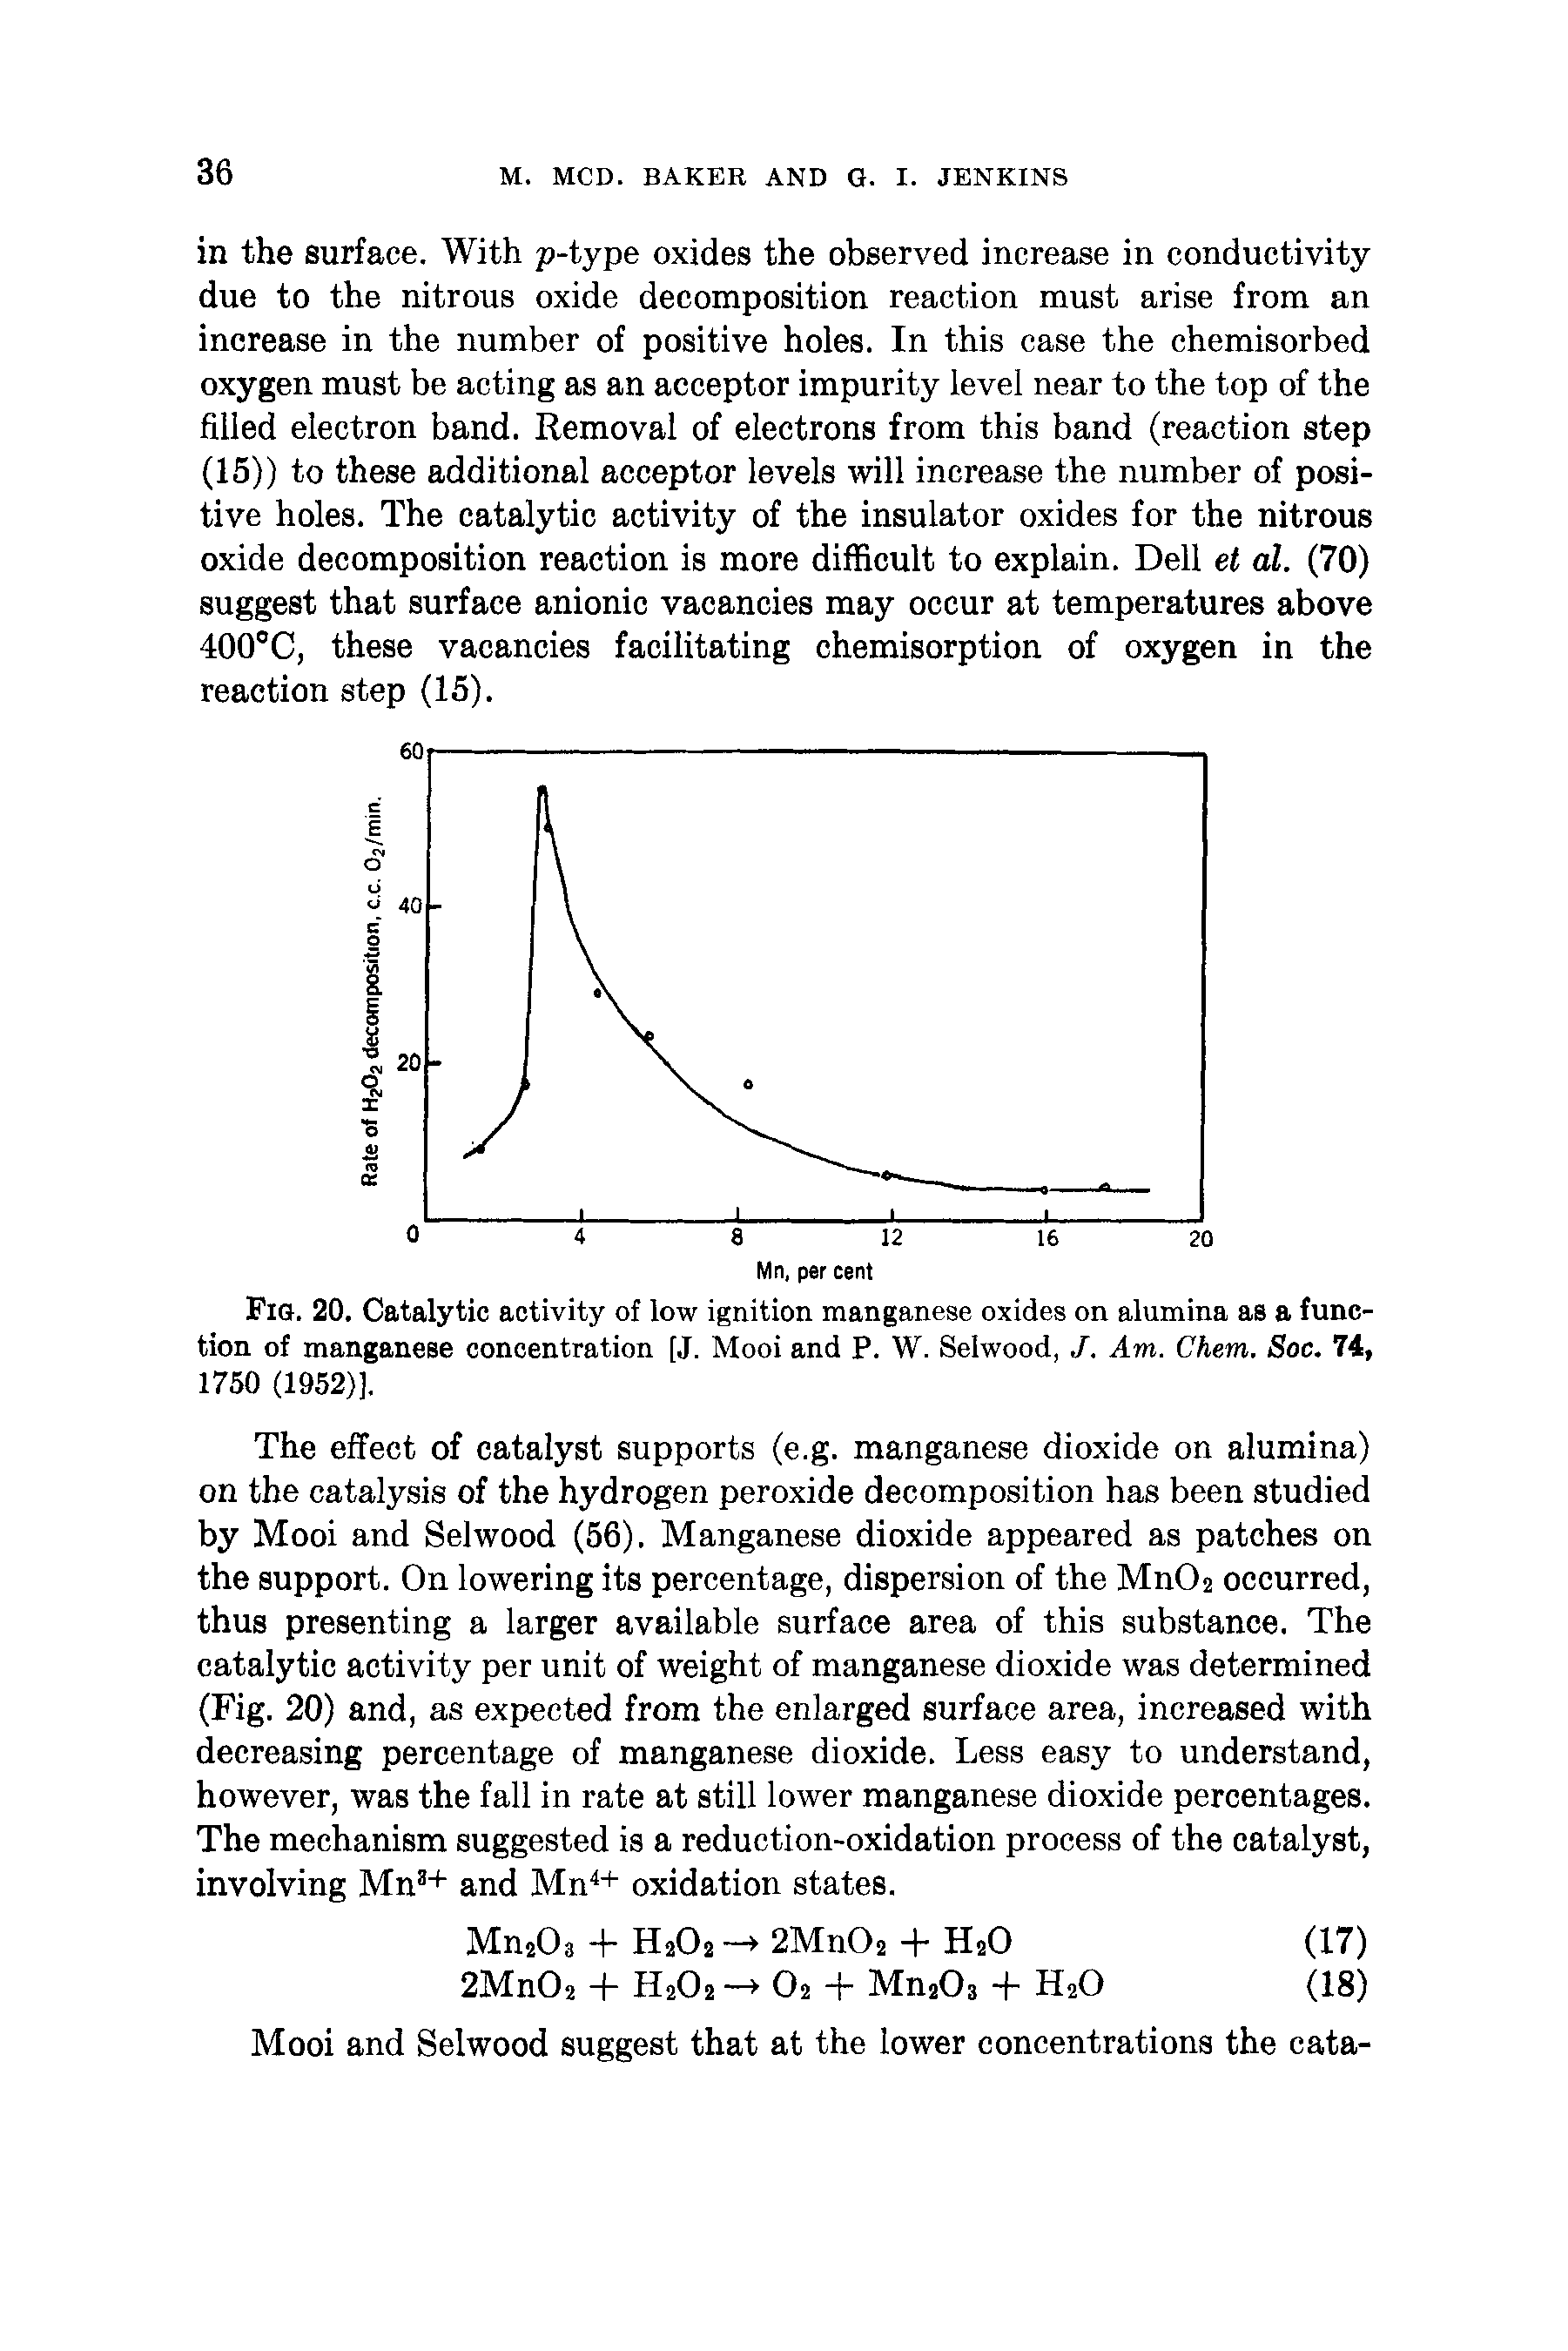 Fig. 20. Catalytic activity of low ignition manganese oxides on alumina as a function of manganese concentration [J. Mooi and P. W. Selwood, J. Avi. Chem. Soc. H, 1750 (1952)].